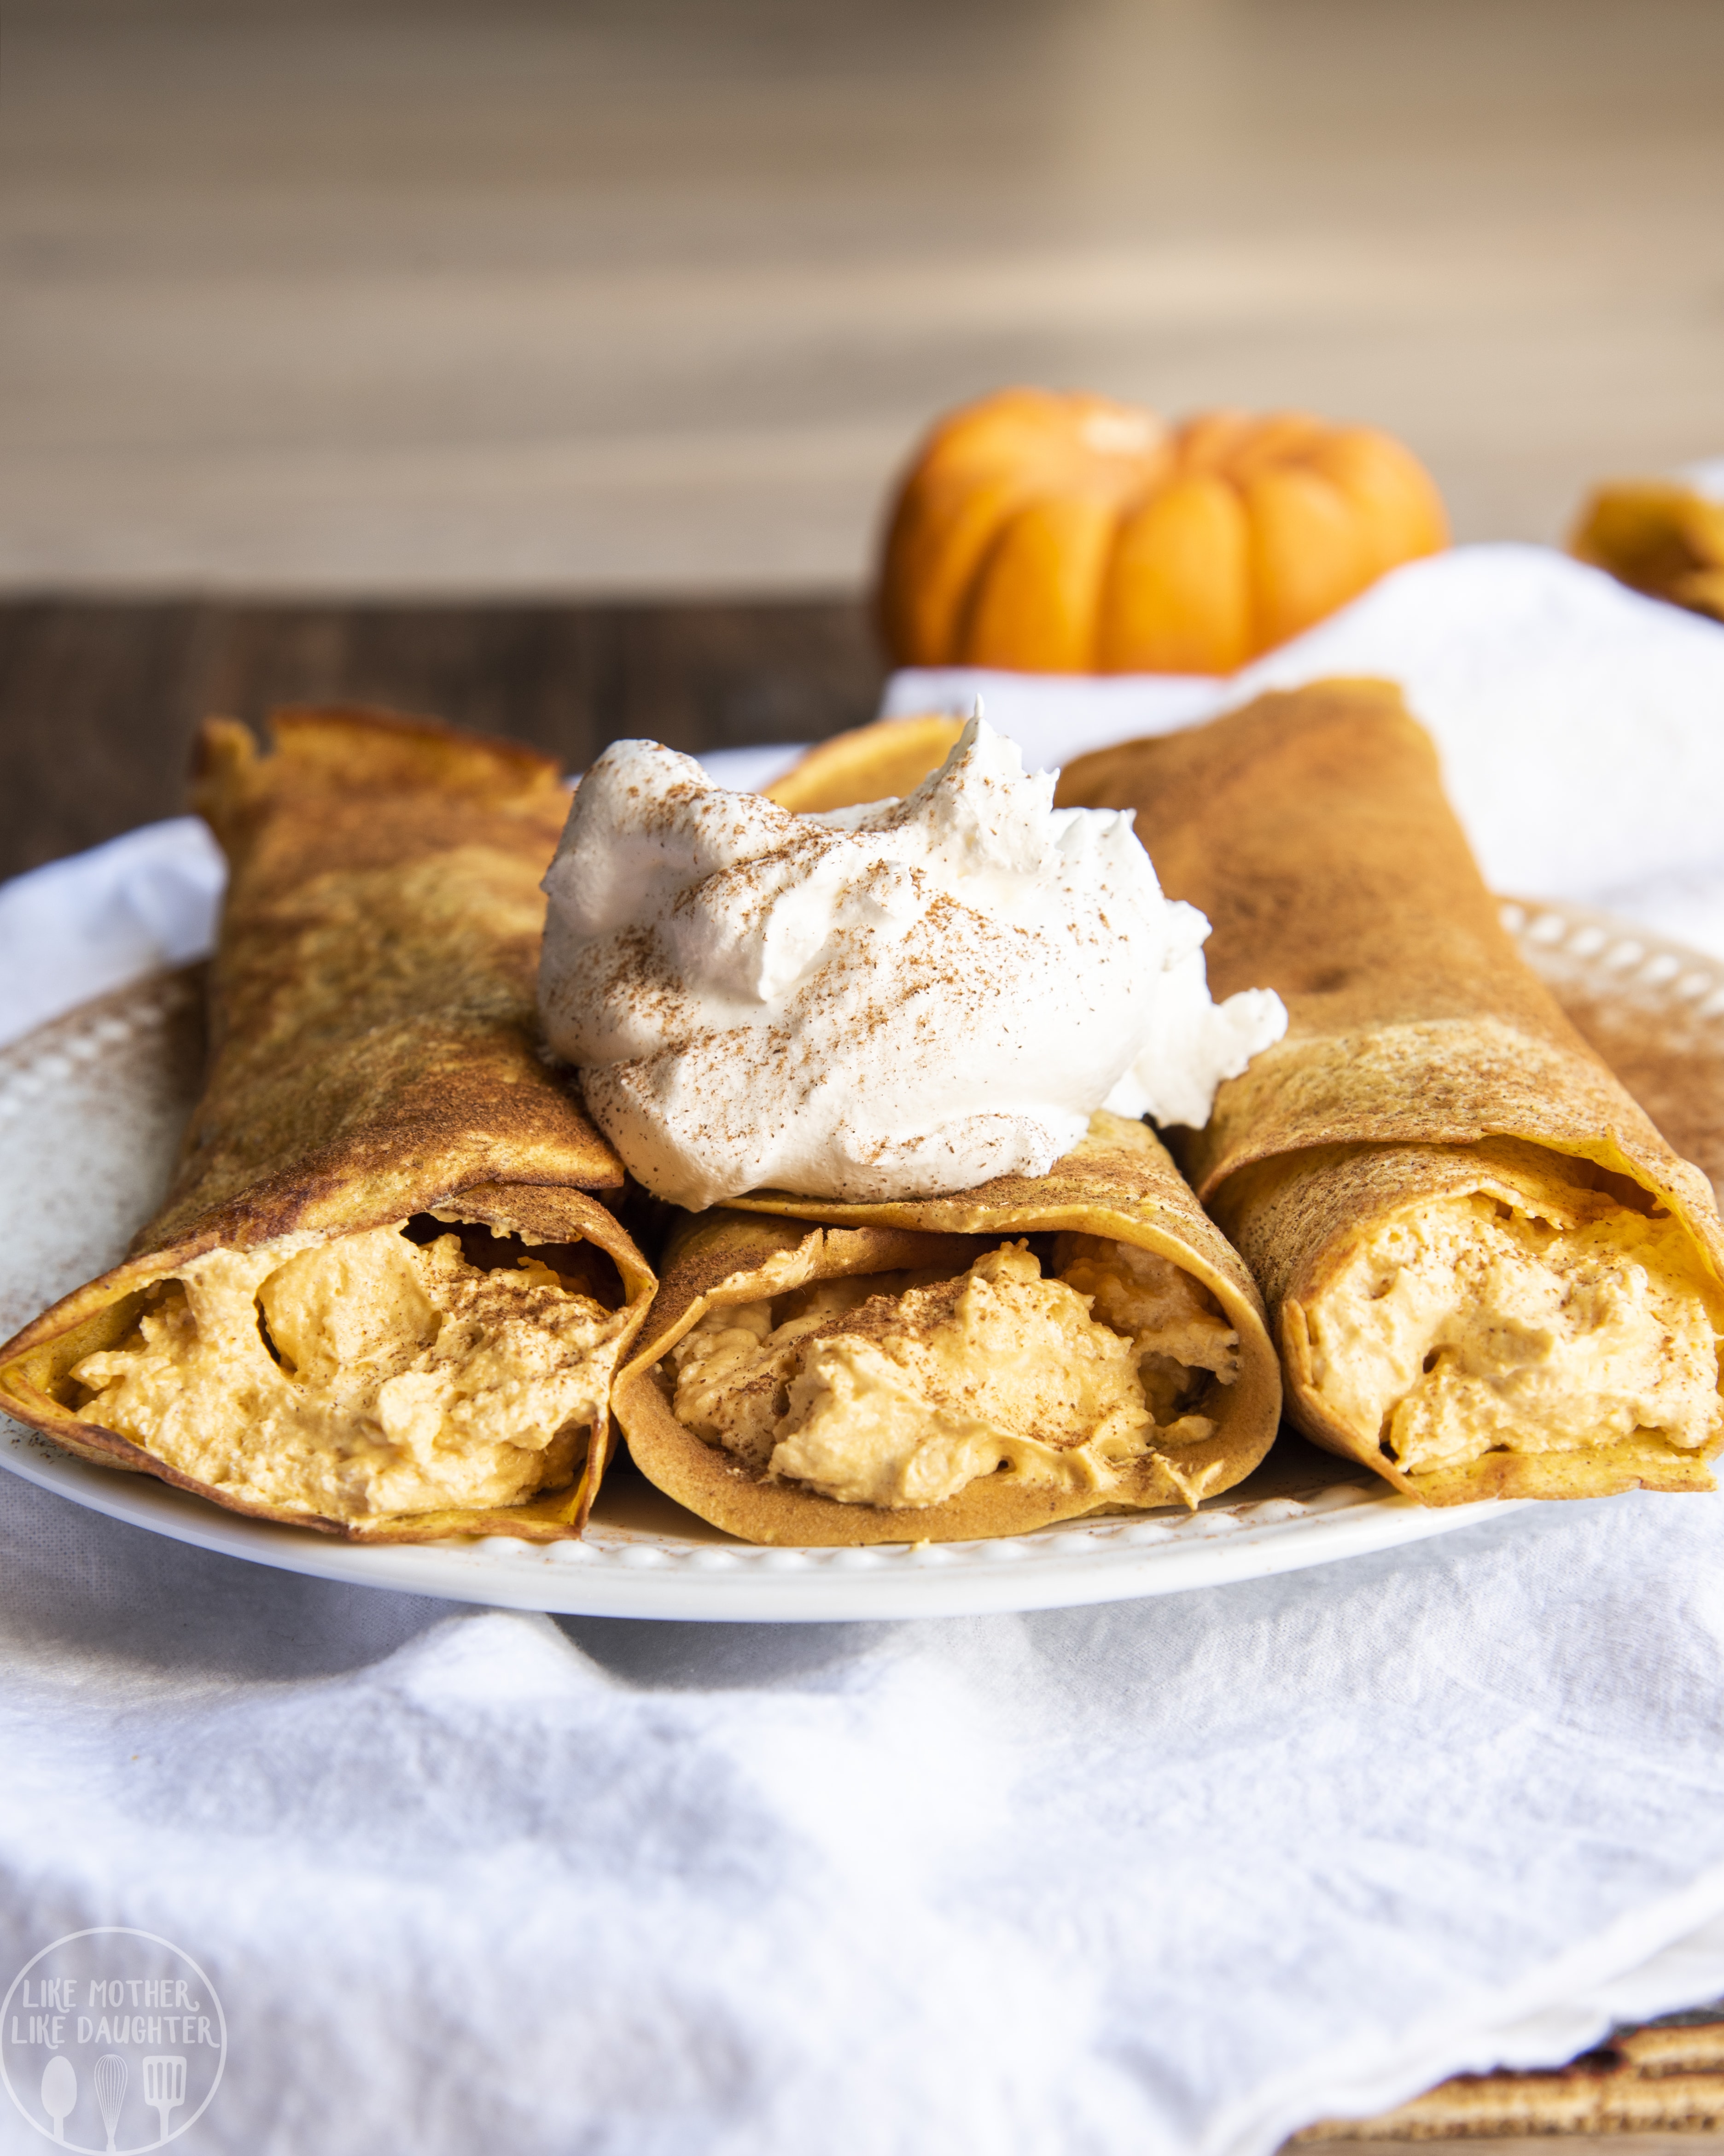 Pumpkin crepes with pumpkin cheesecake filling and topped with whipped cream